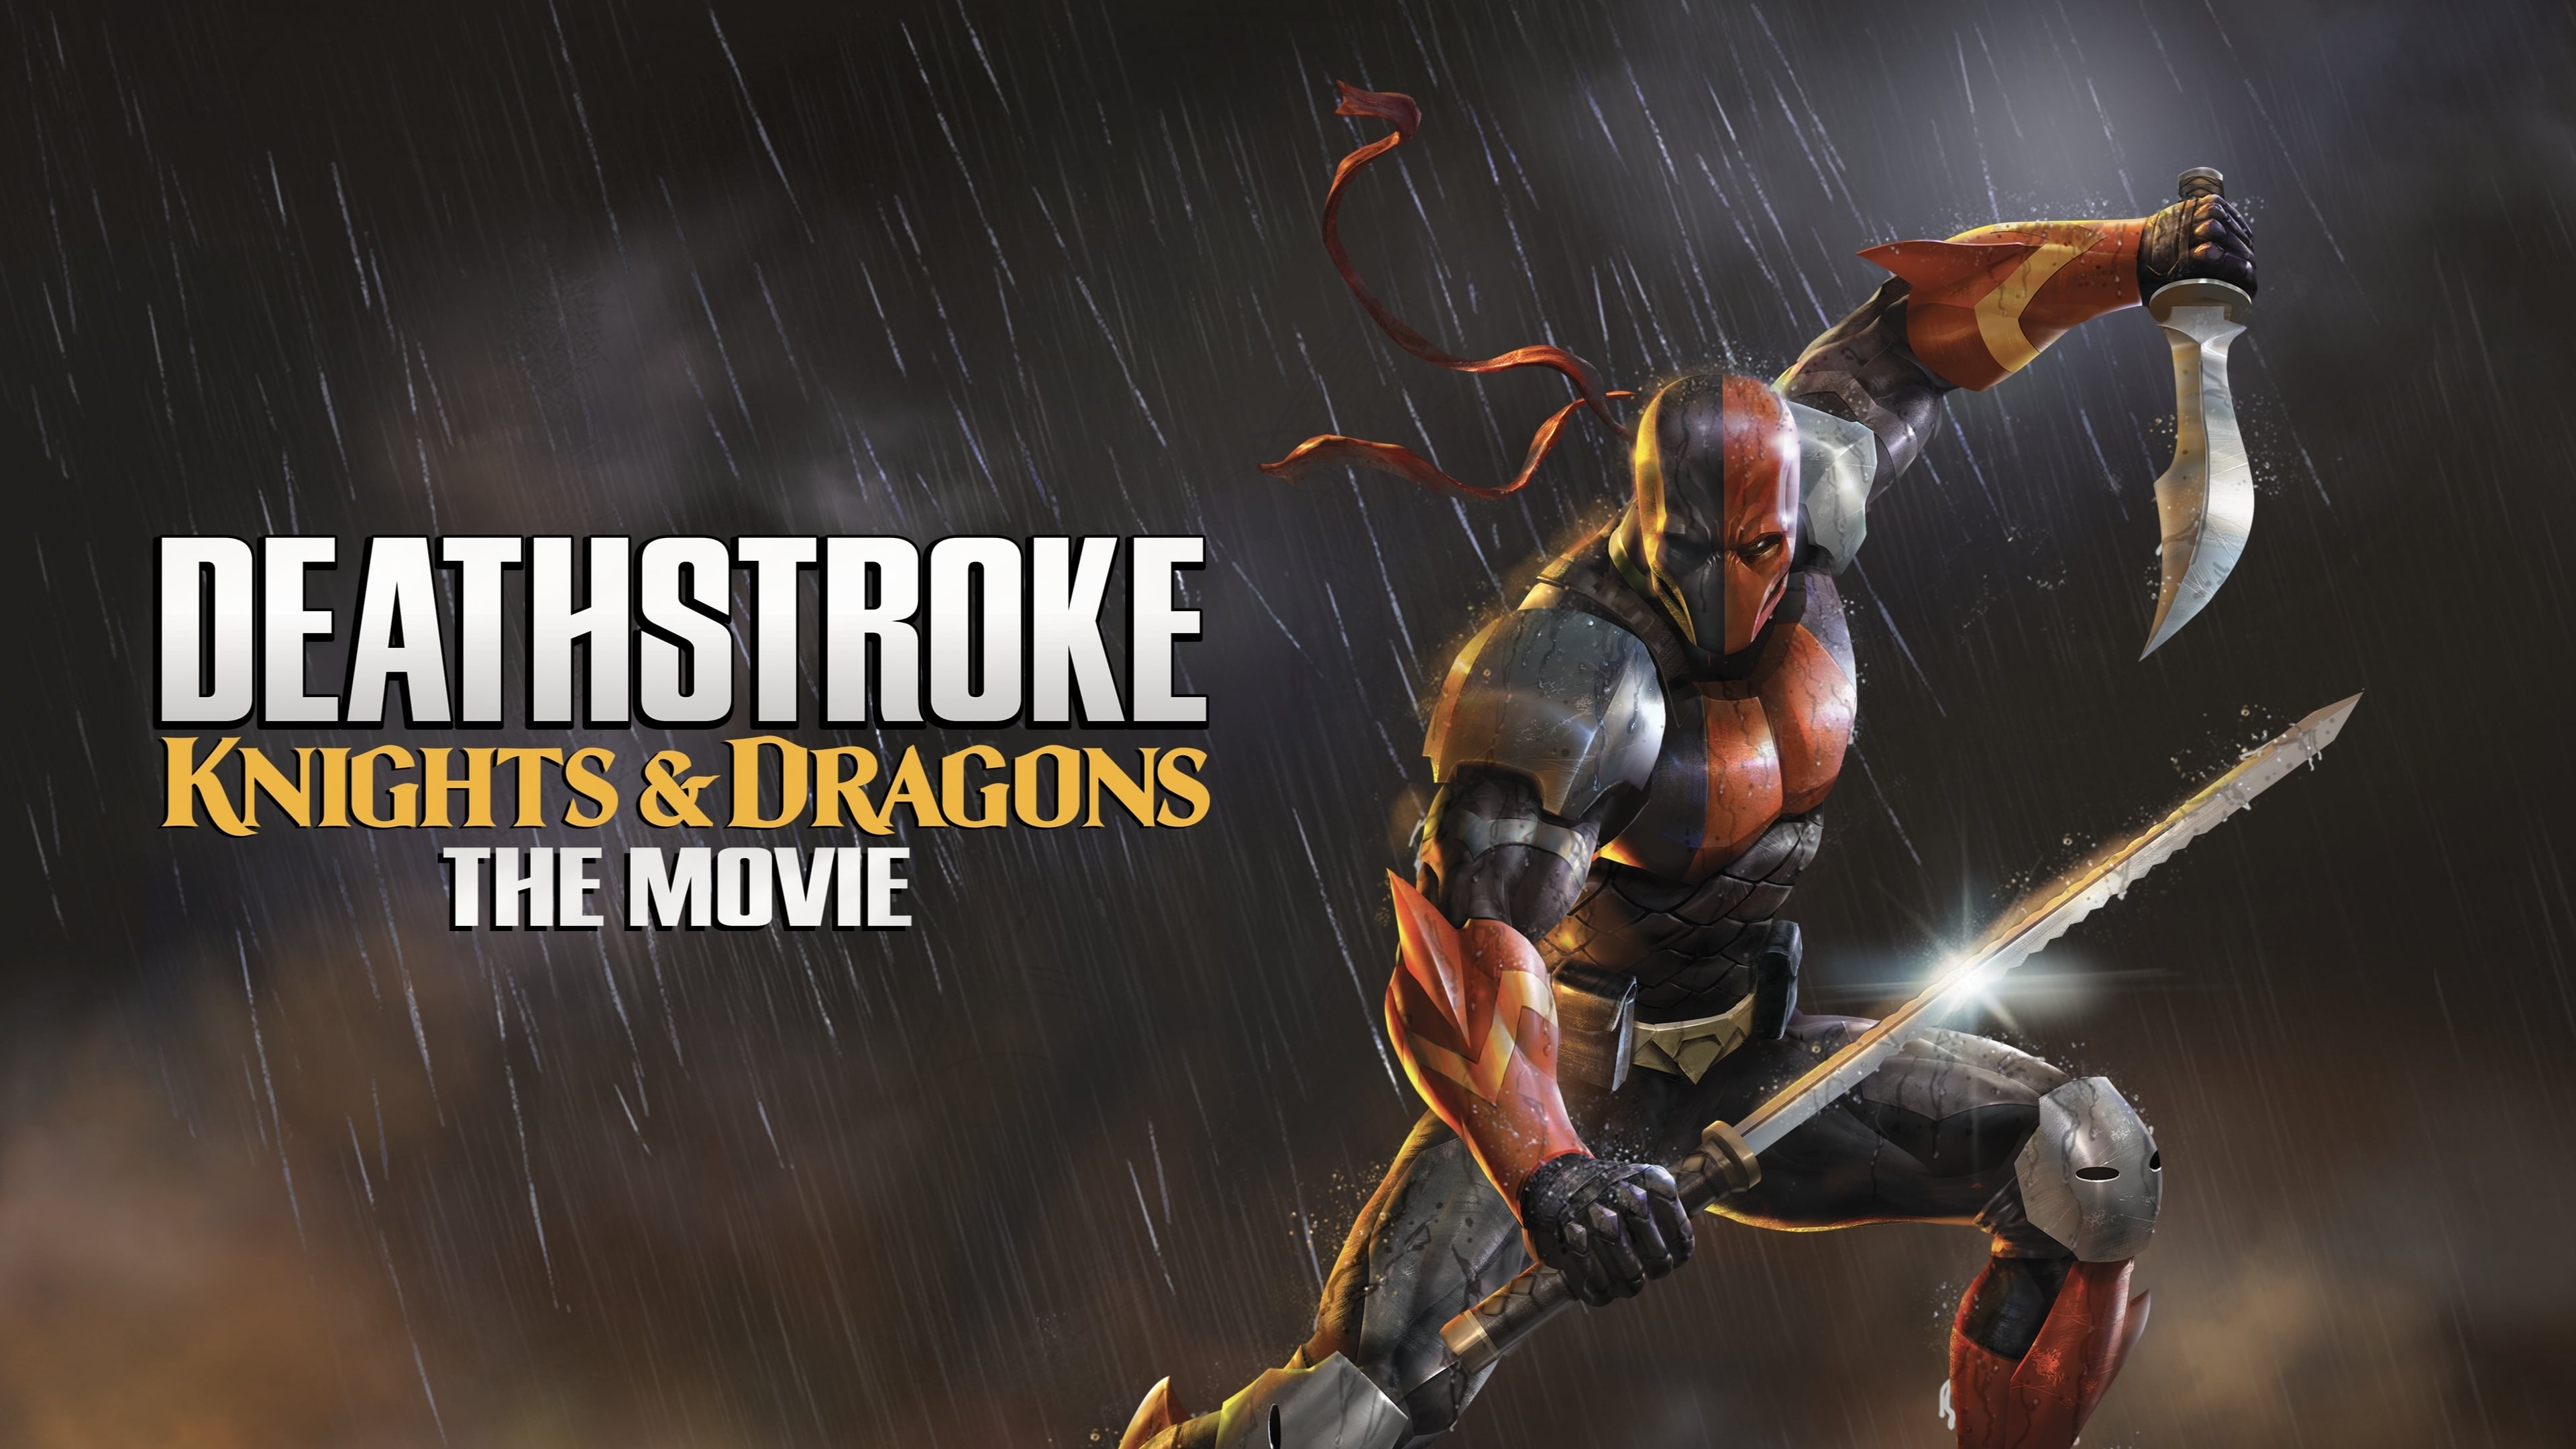 Deathstroke: Knights & Dragons - The Movie (2020)